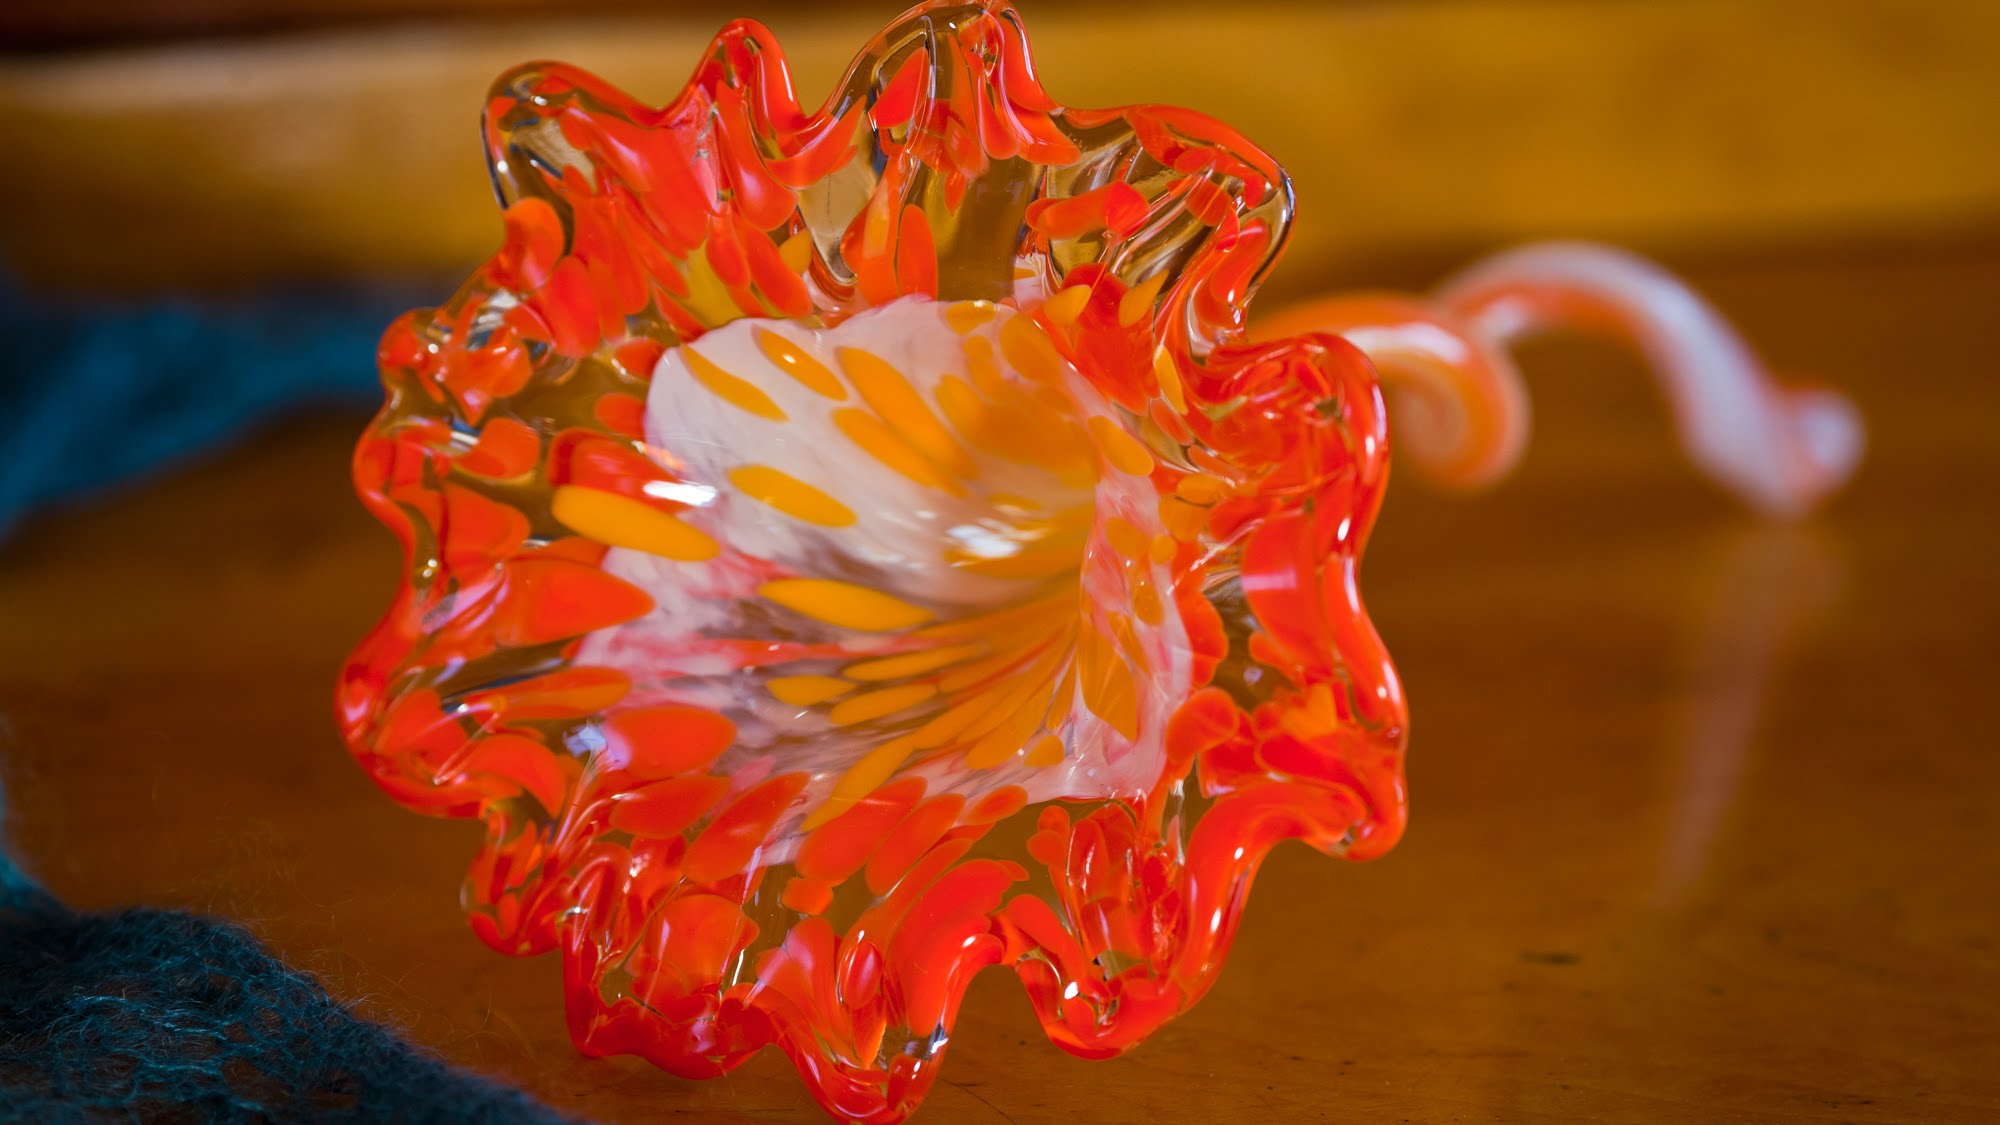 Make Your Own Glass Flower - YouTube